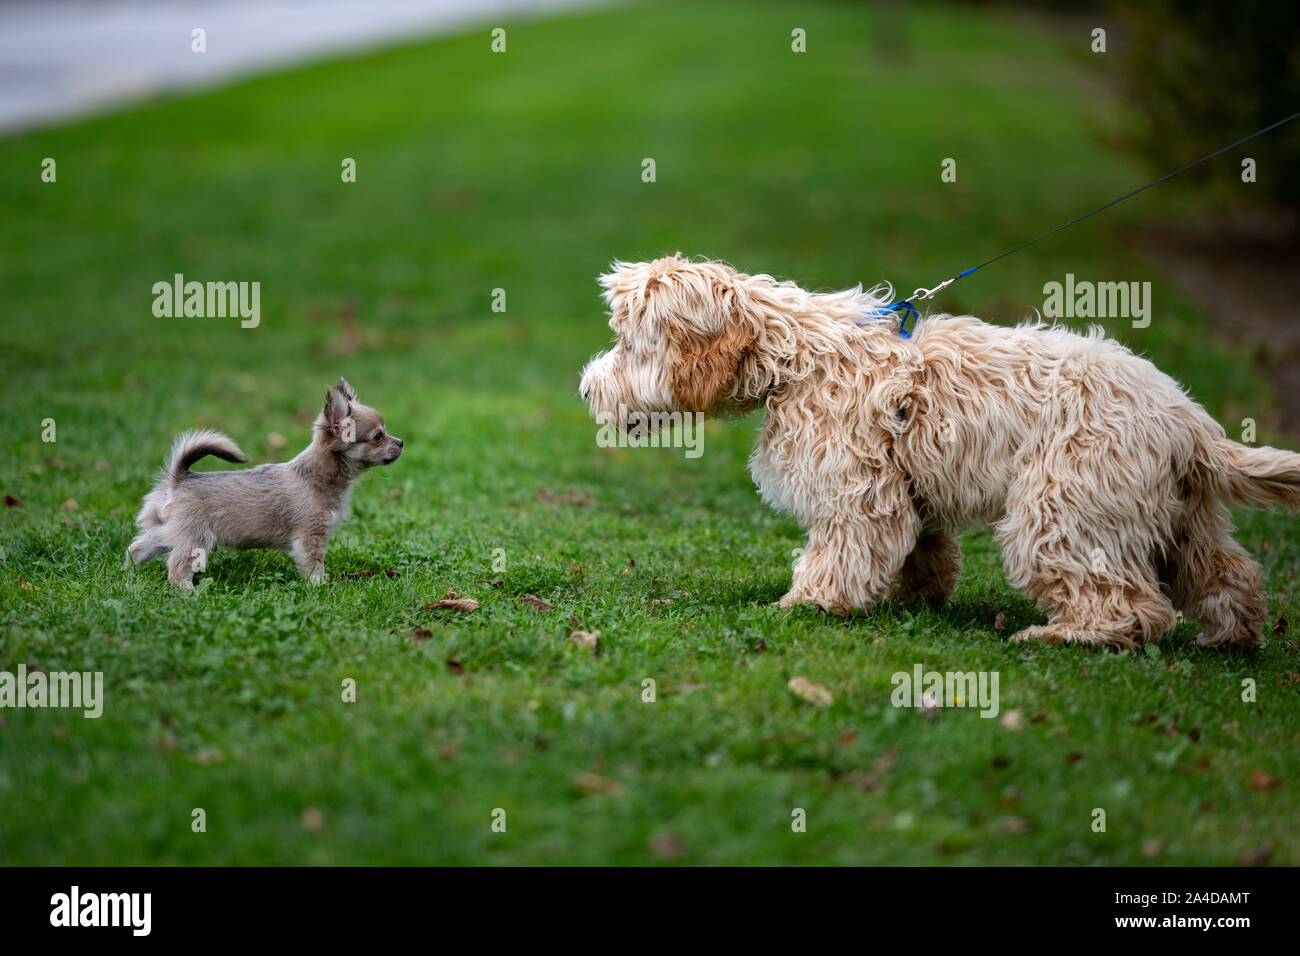 Two dogs checking each other out in a park, Ireland Stock Photo